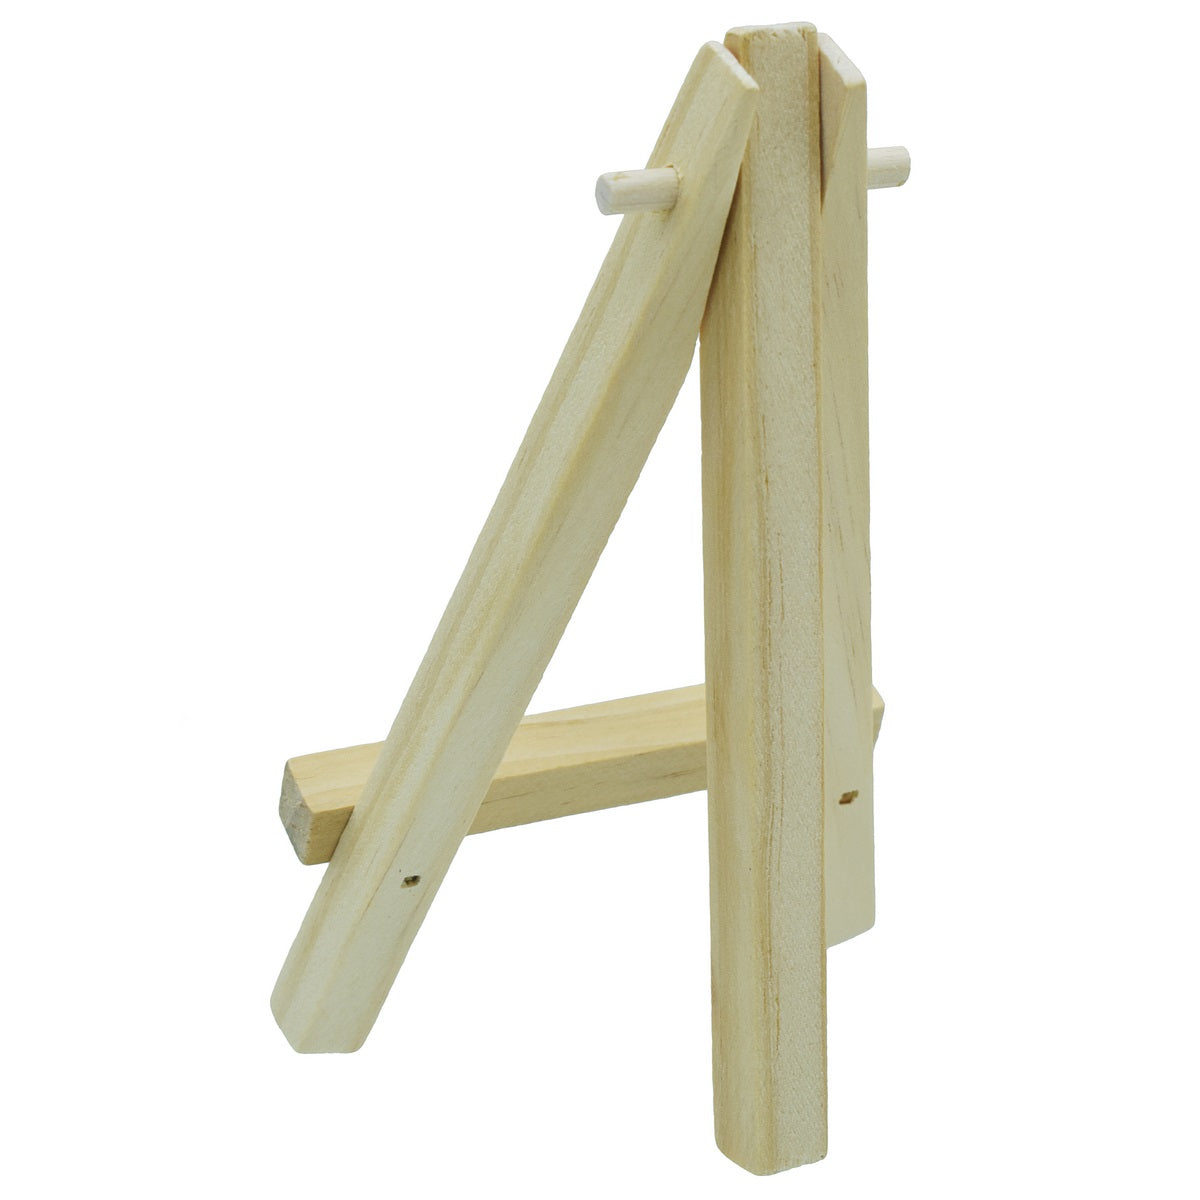 Wooden Easel Stand - For Artists, Corporate Gifting, Office Sign Board Display, Drawing Painting, Shops, Restaurants JAWECT01